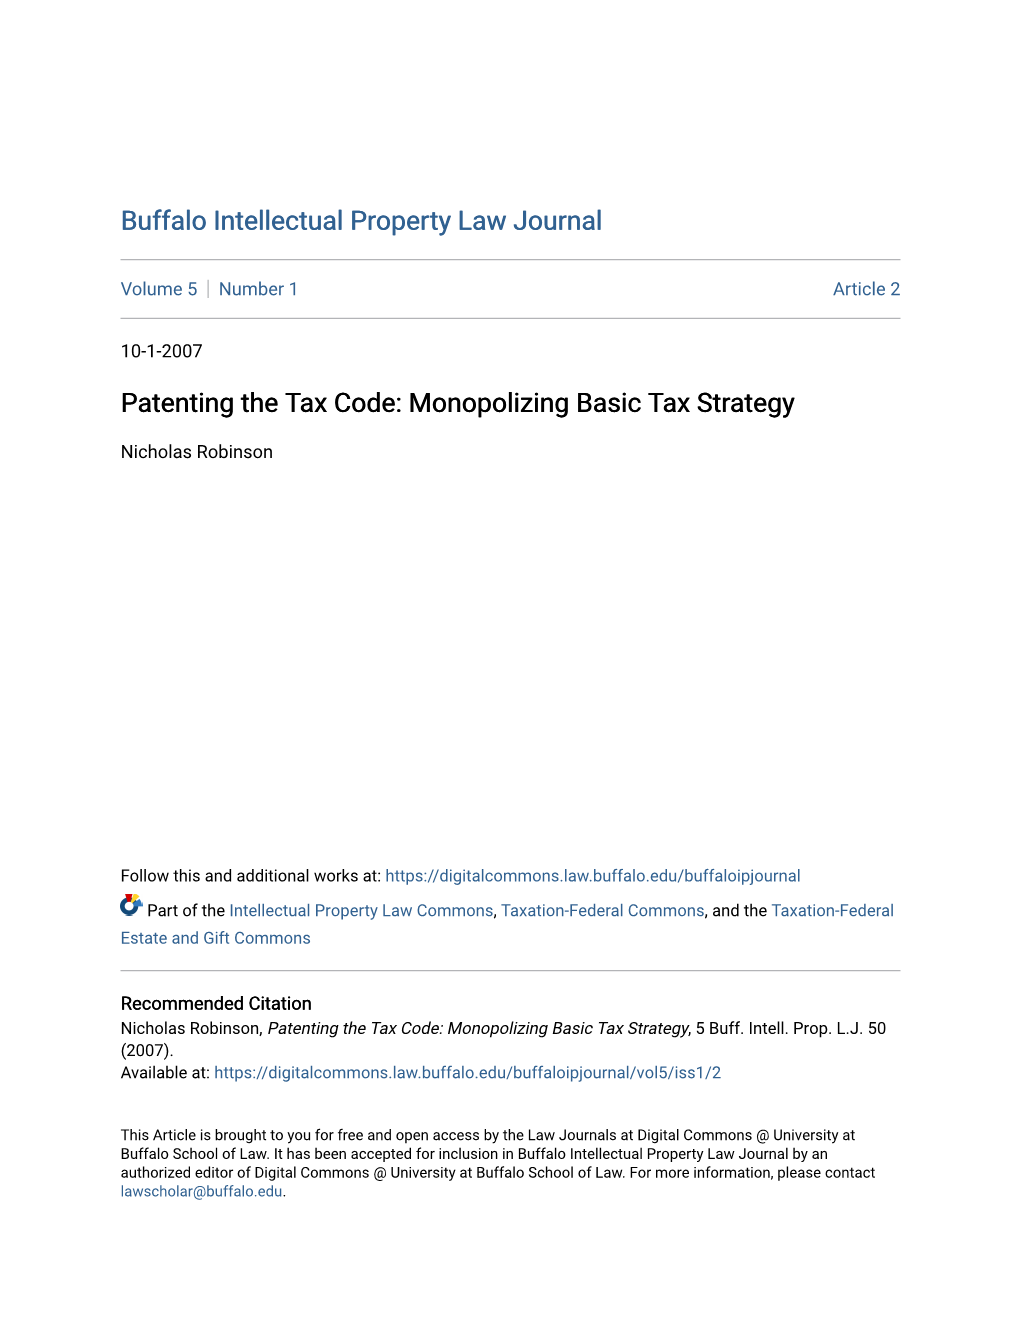 Patenting the Tax Code: Monopolizing Basic Tax Strategy